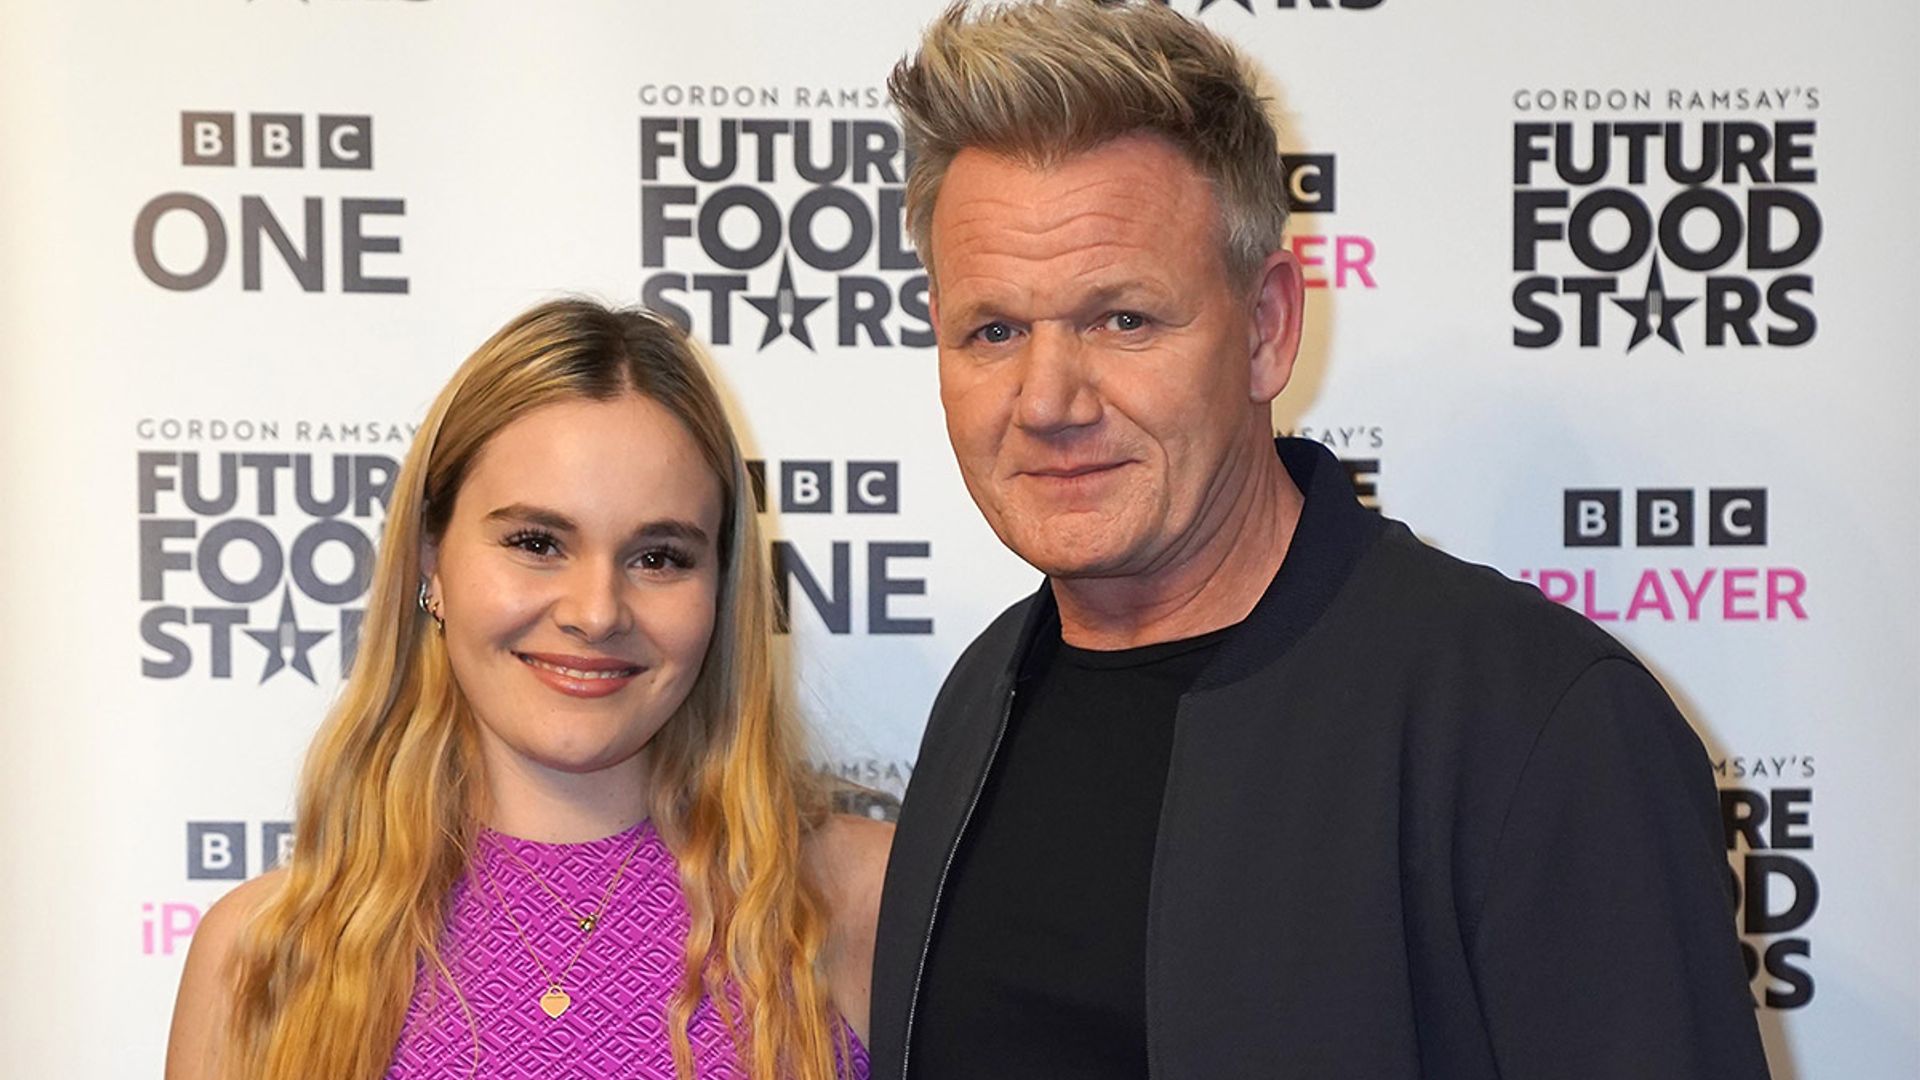 Holly Ramsay exposes dad Gordon's controversial meal